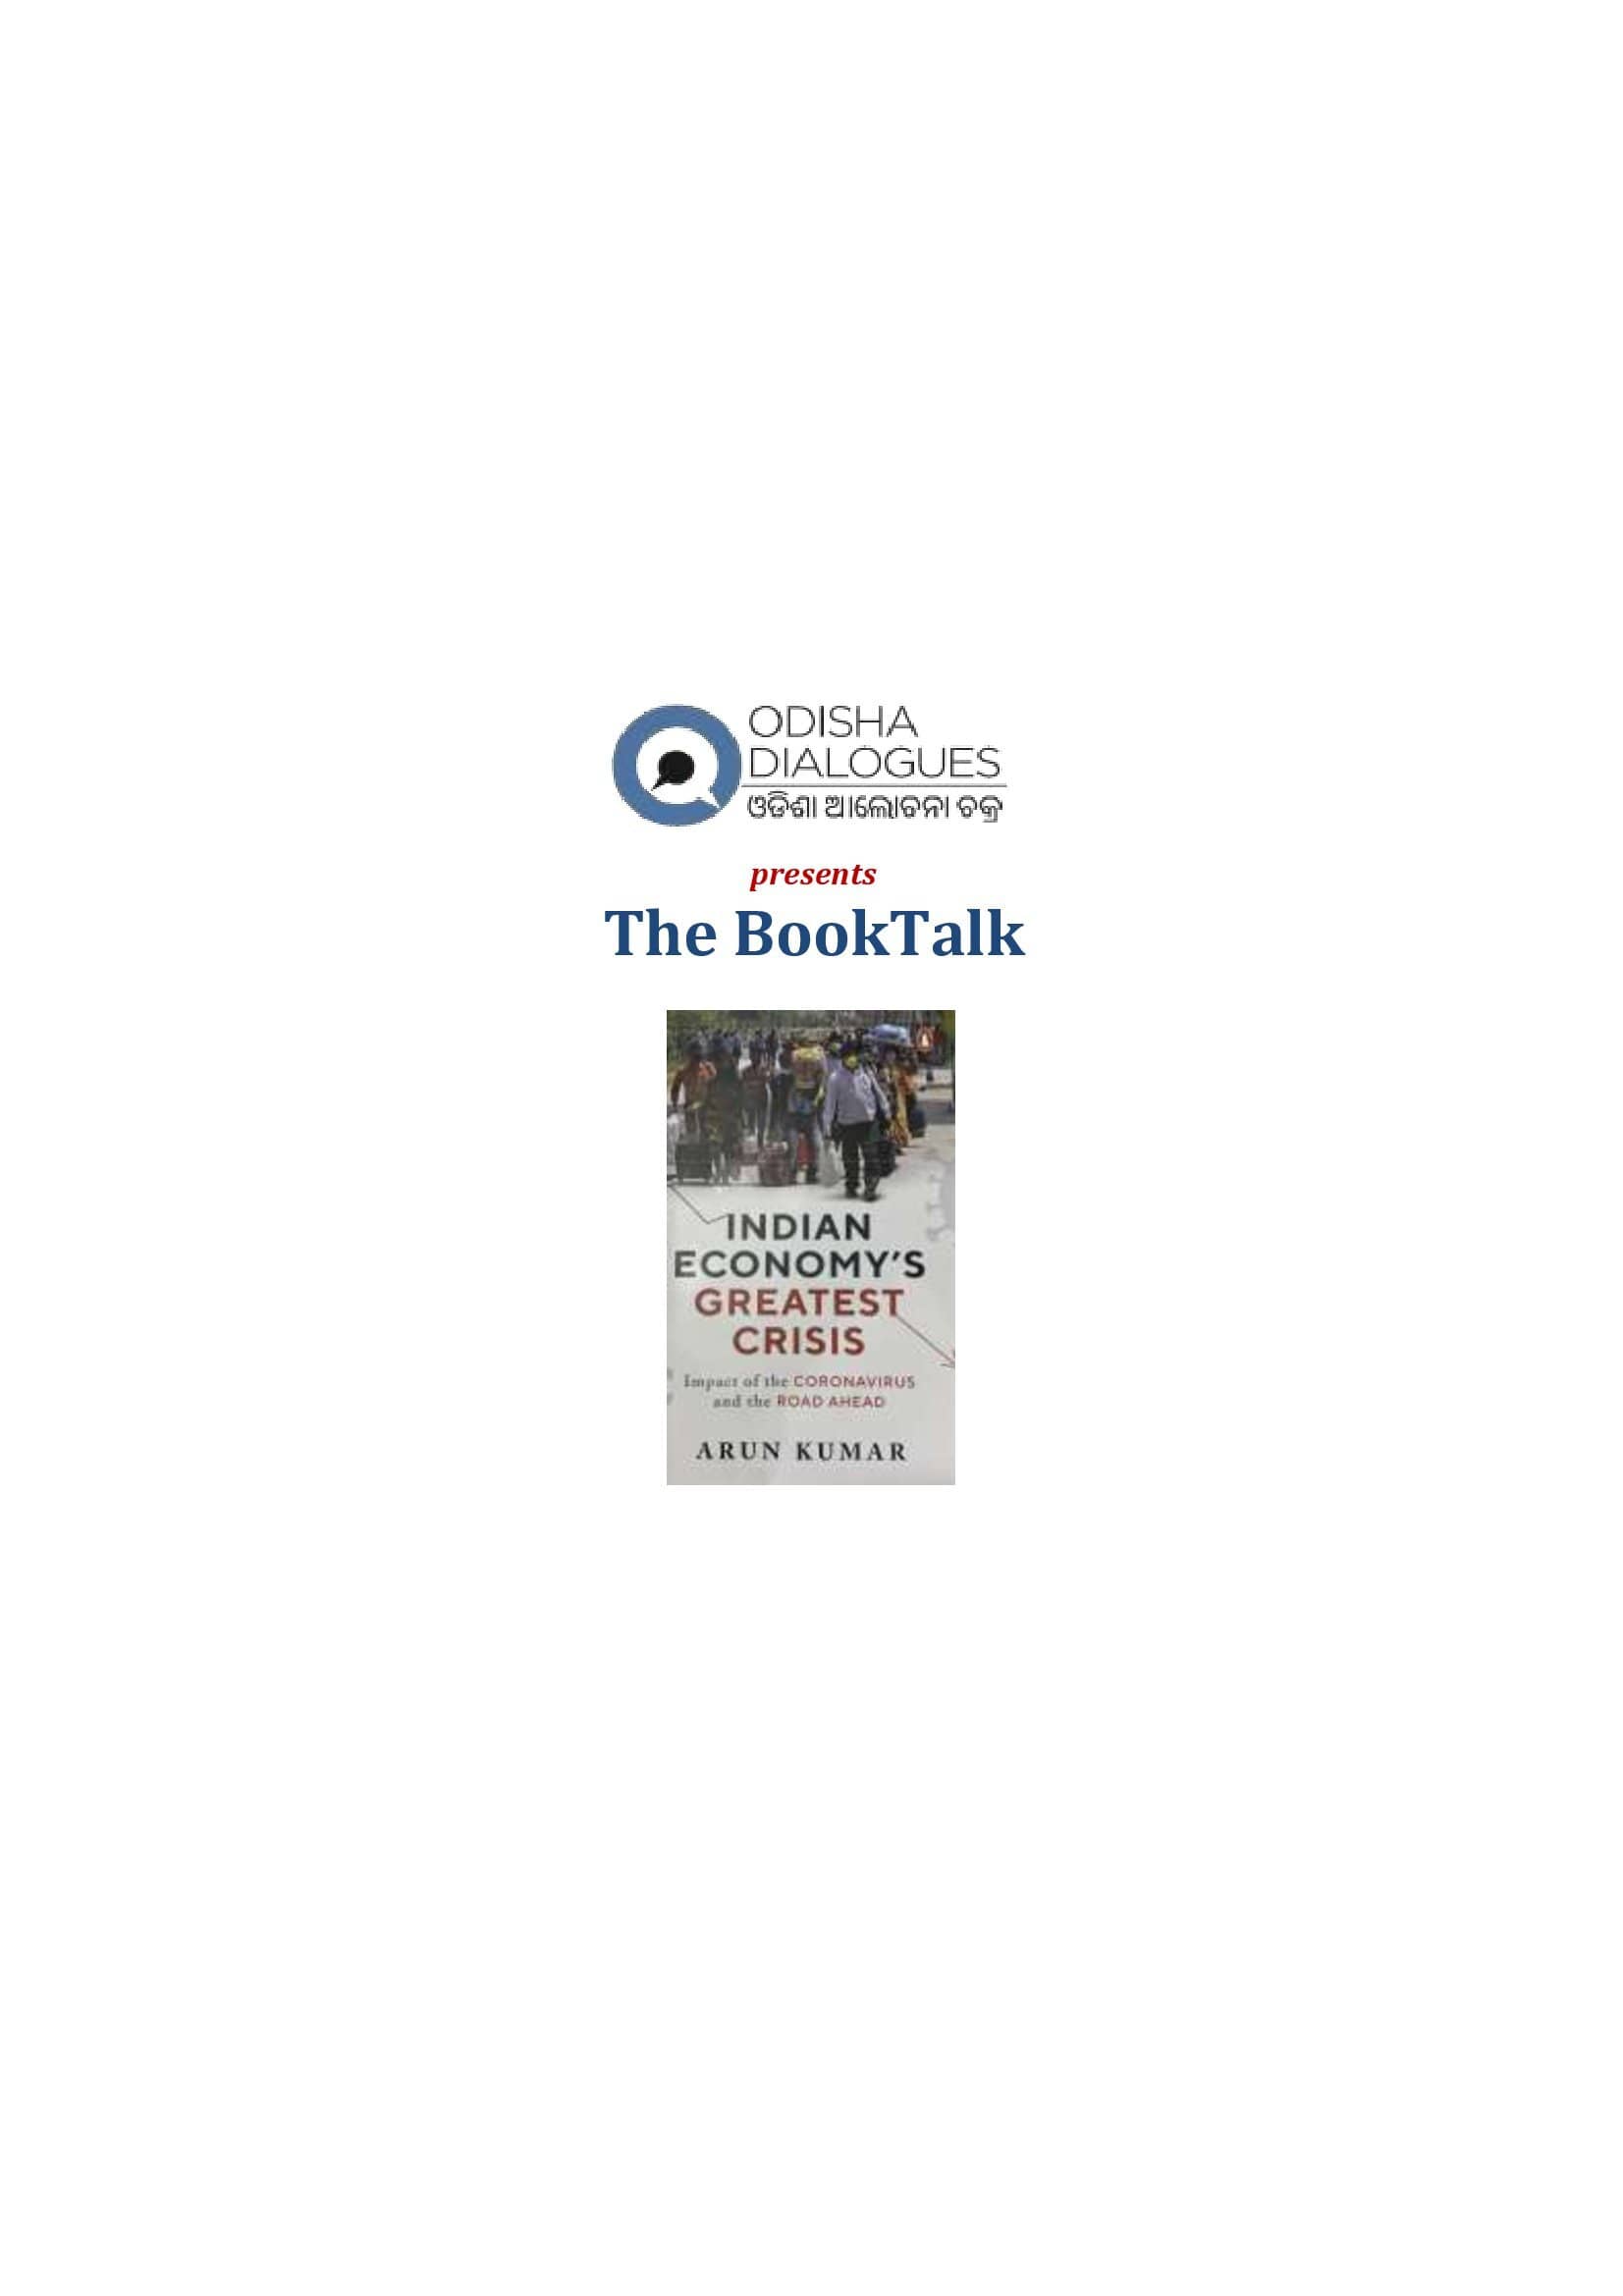 The BookTalk: Indian Economy’s Greatest Crisis by Prof Arun Kumar